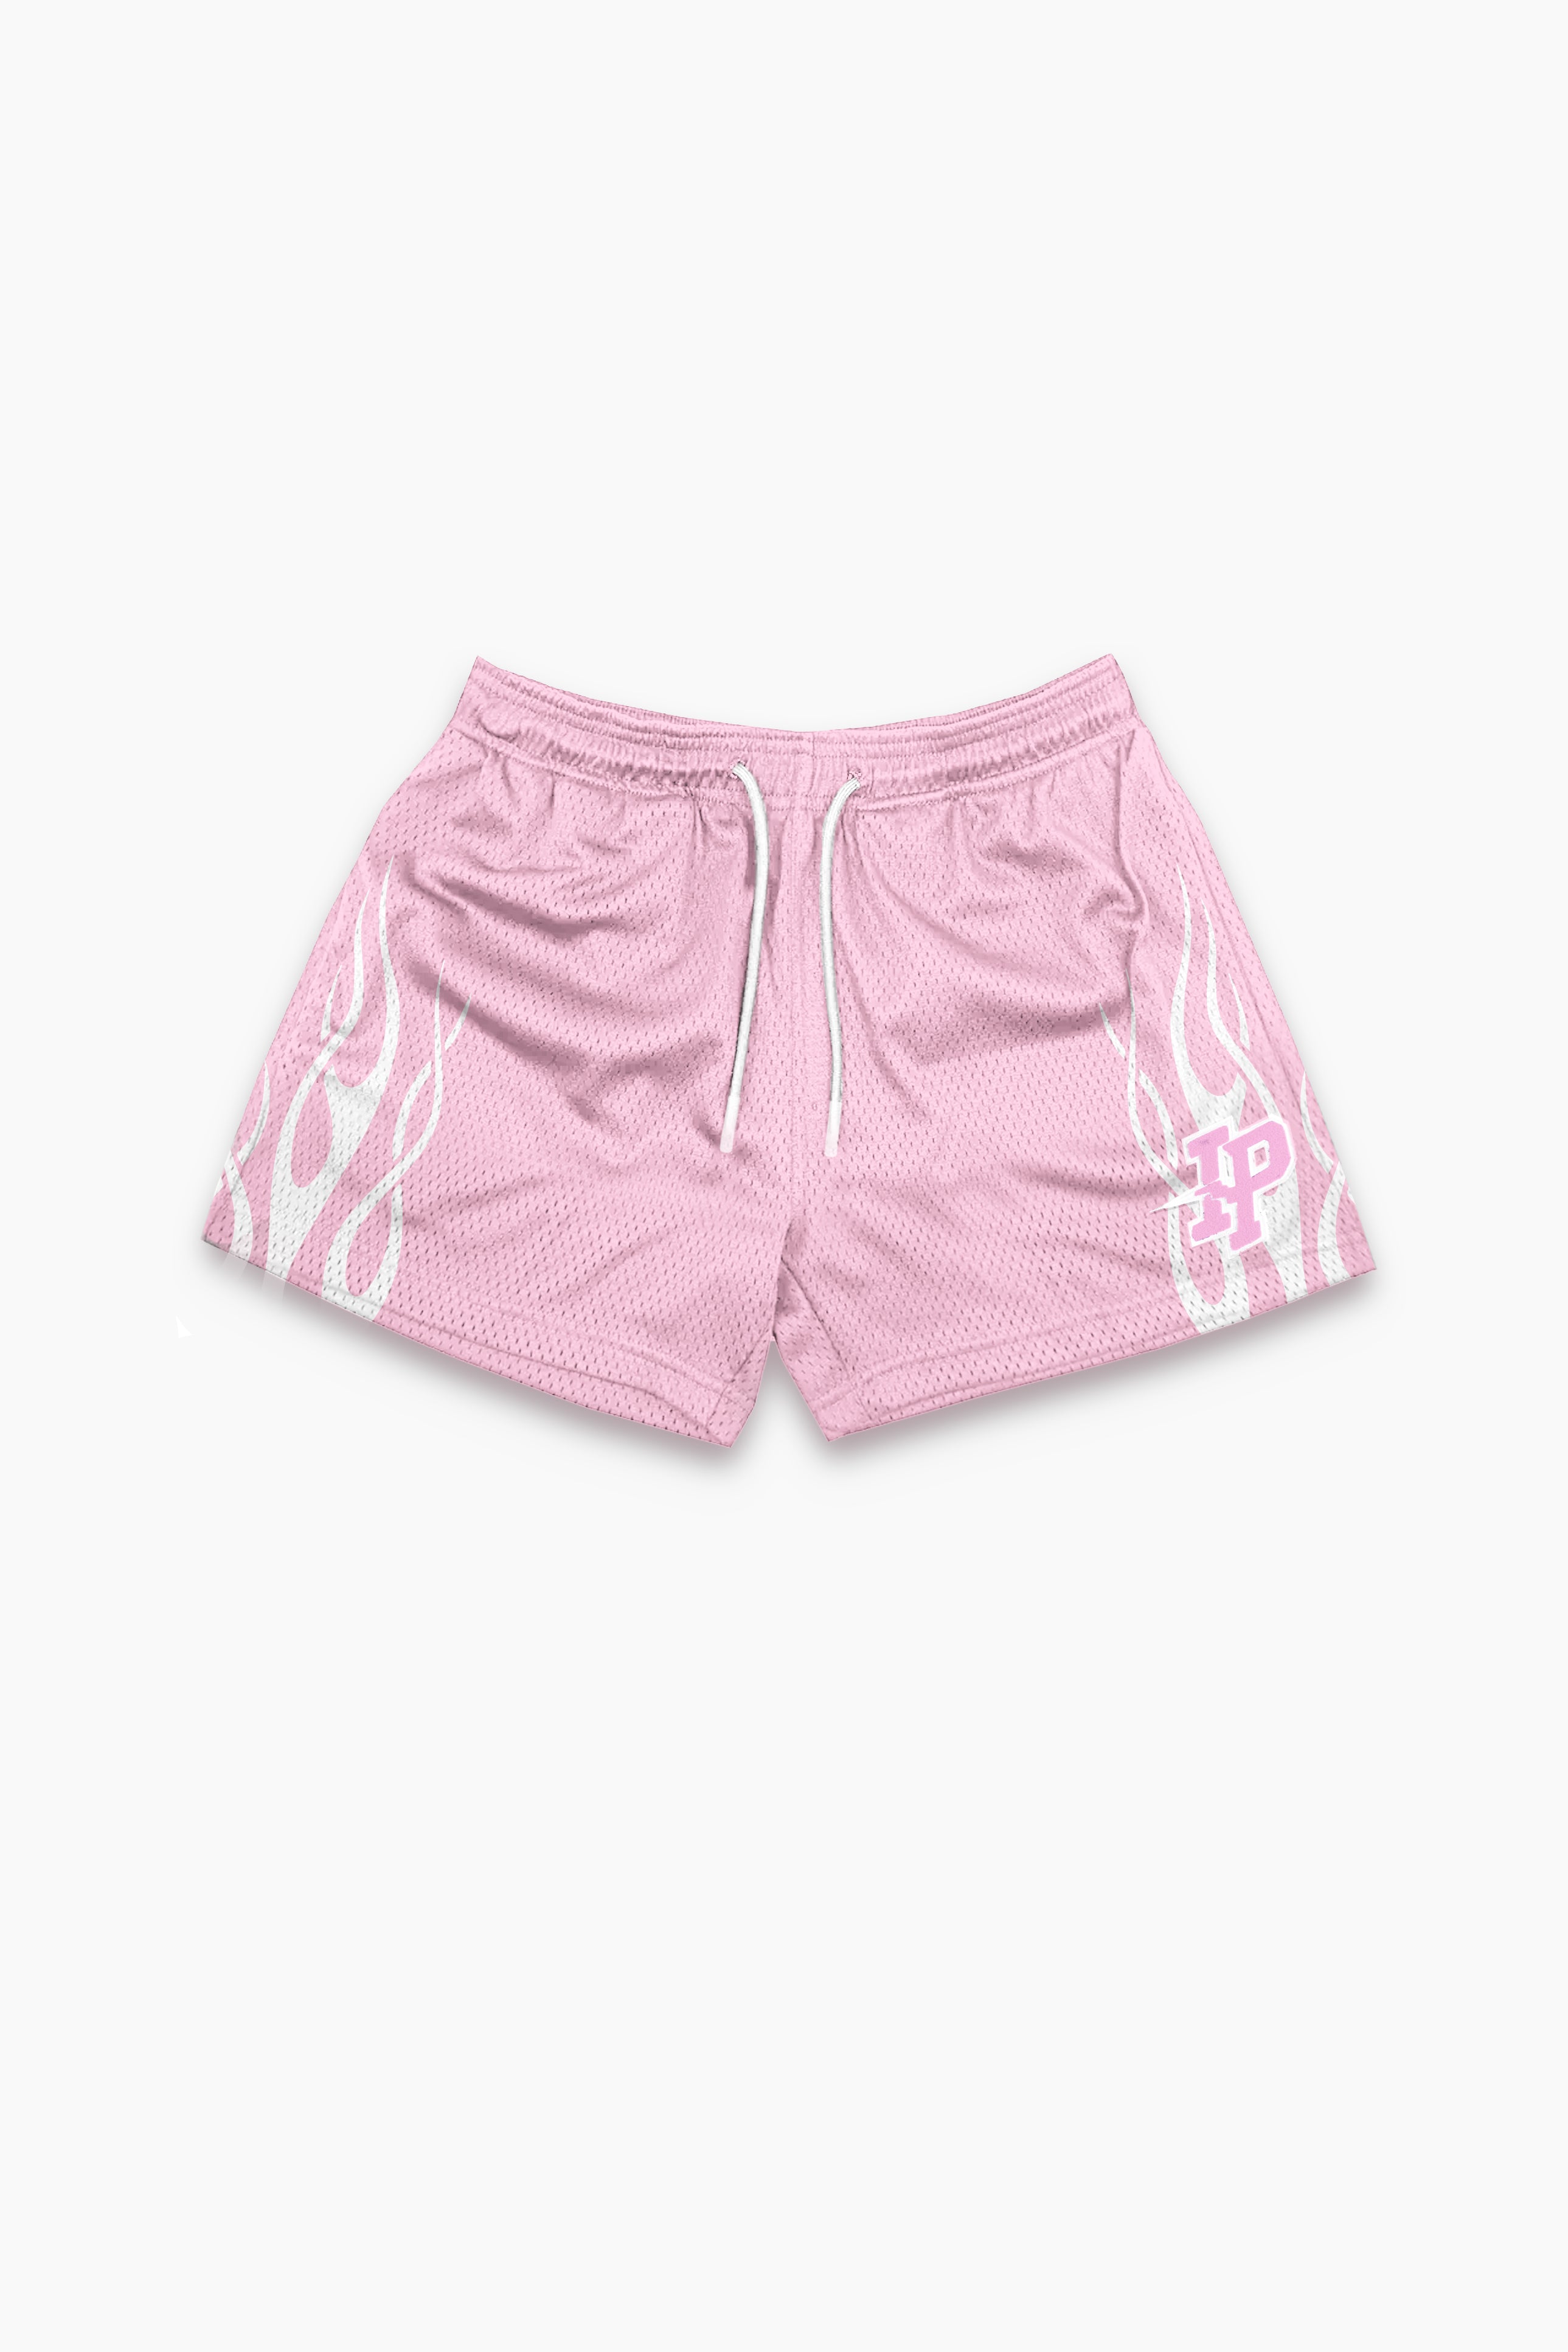 Women’s Graphic Mesh Shorts - Pink Flame